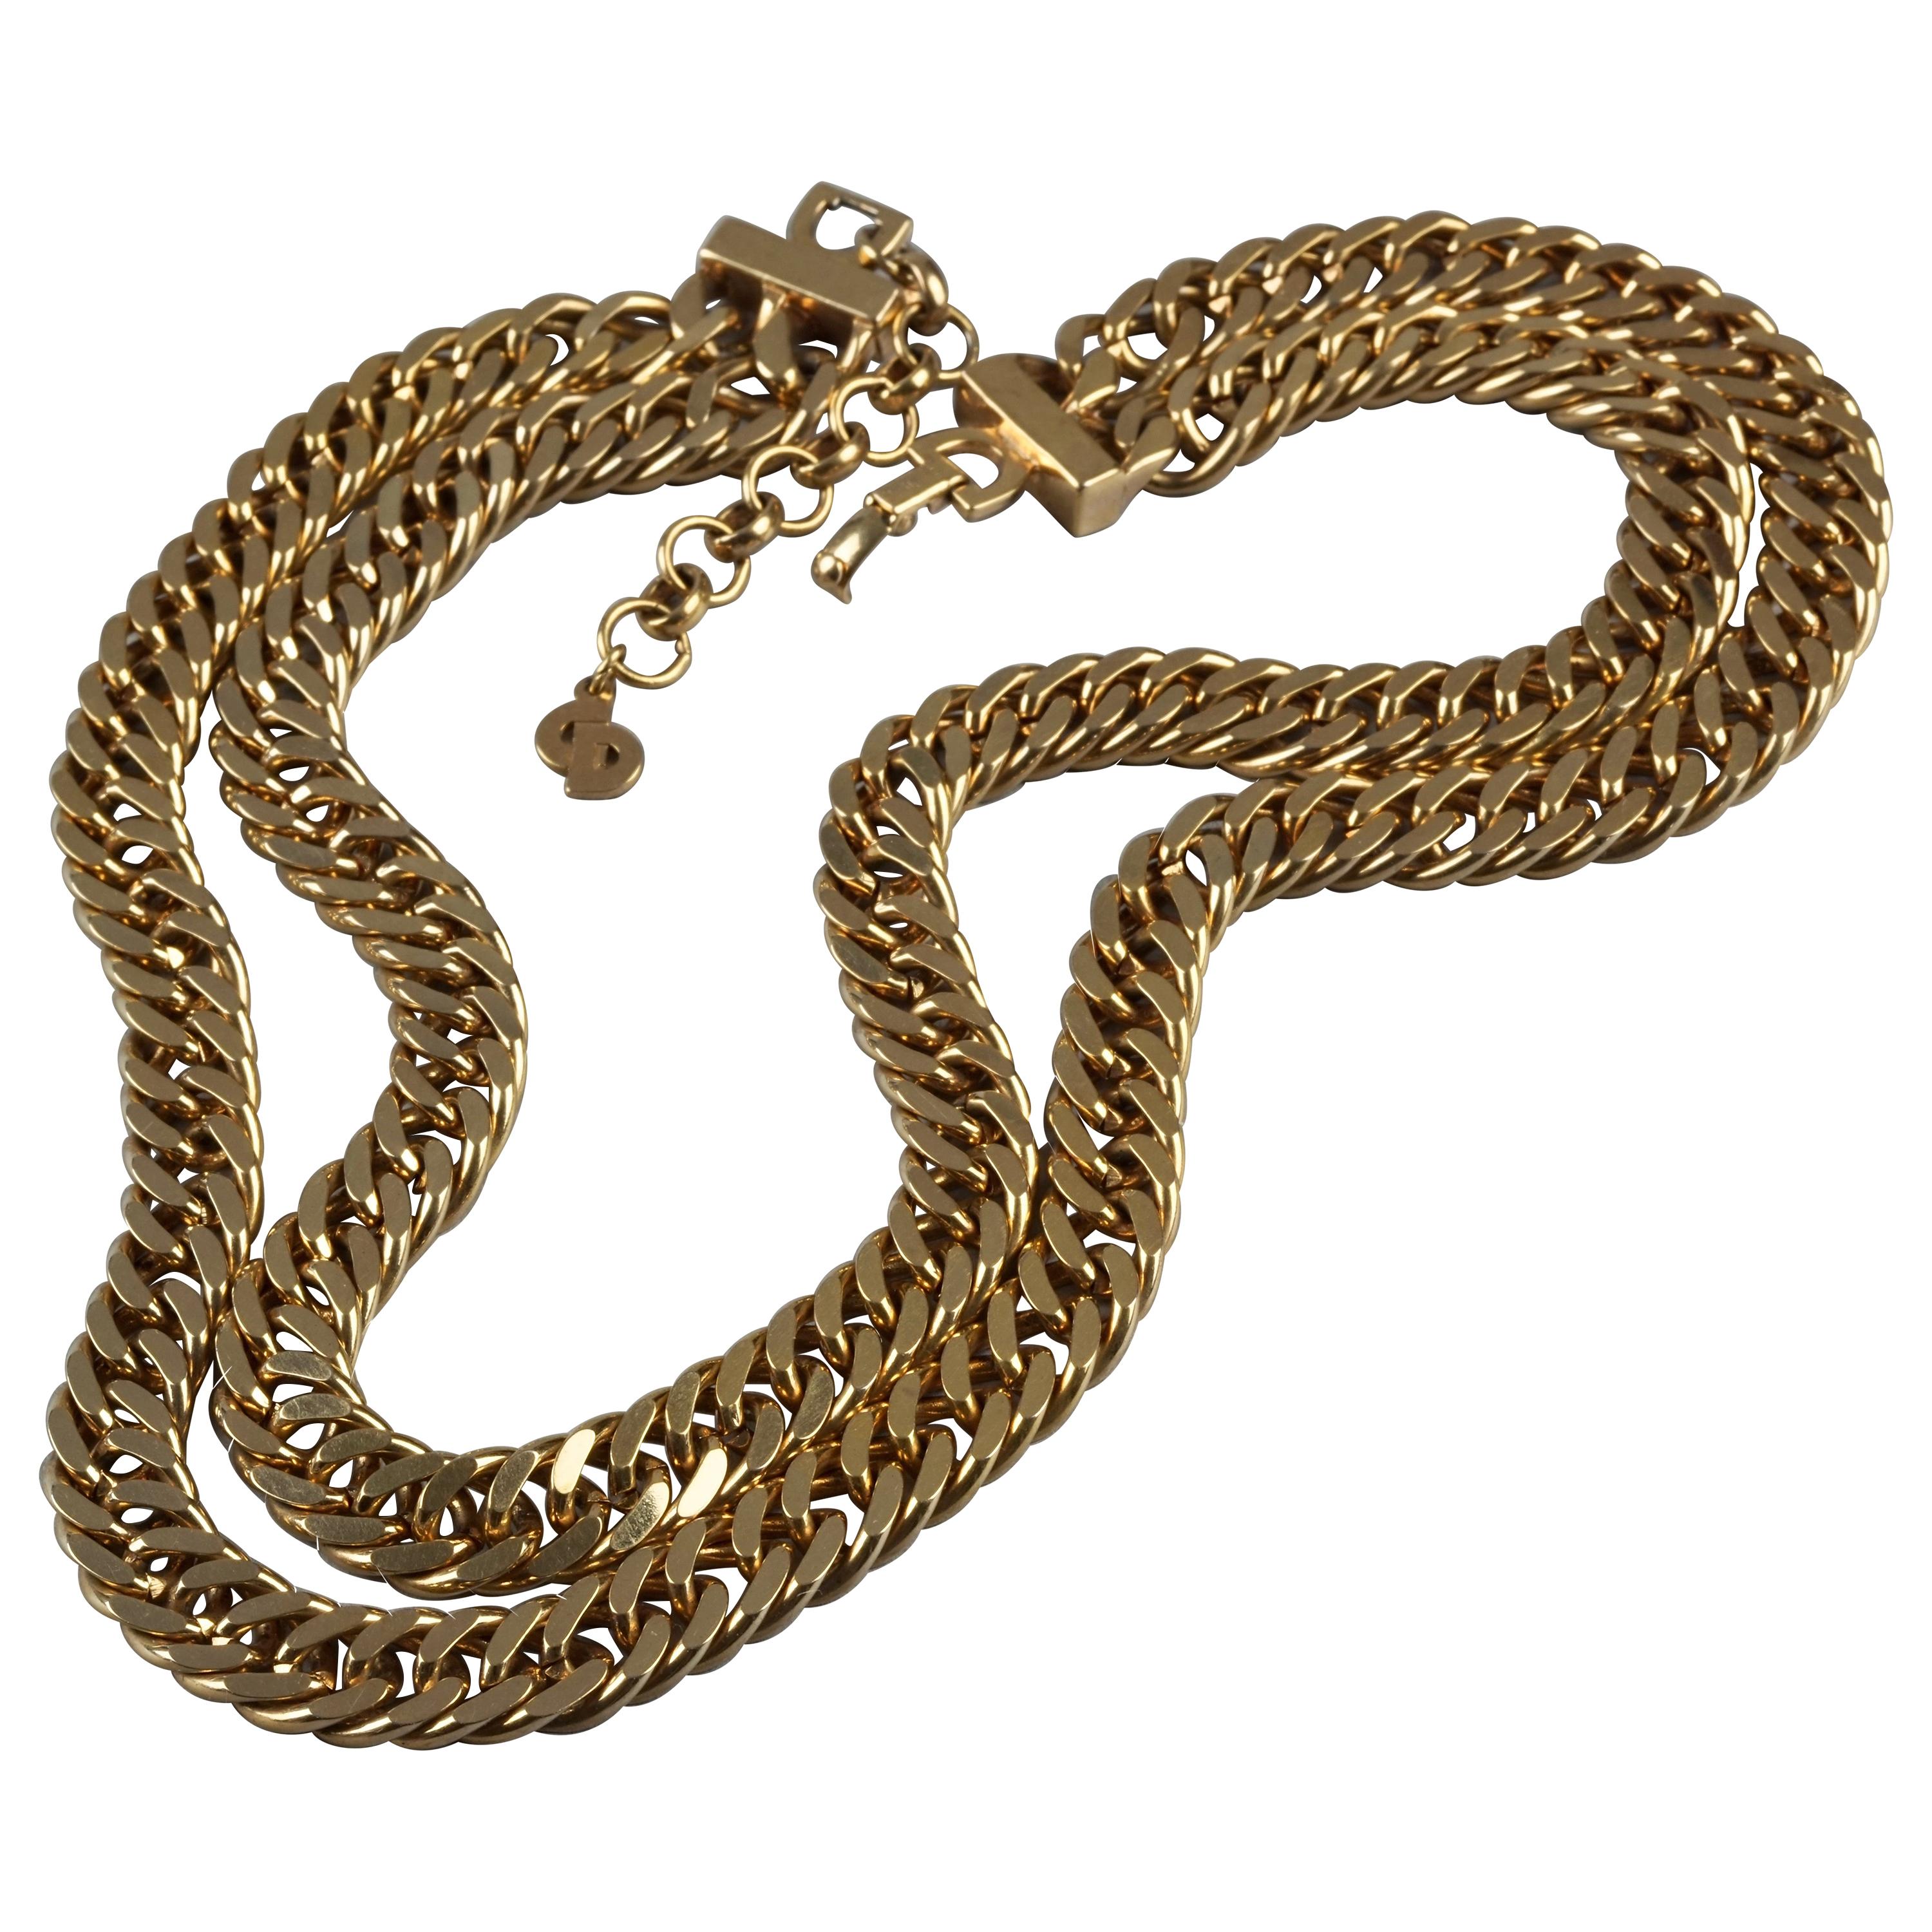 Vintage CHRISTIAN DIOR Chunky Double Chain Choker Necklace